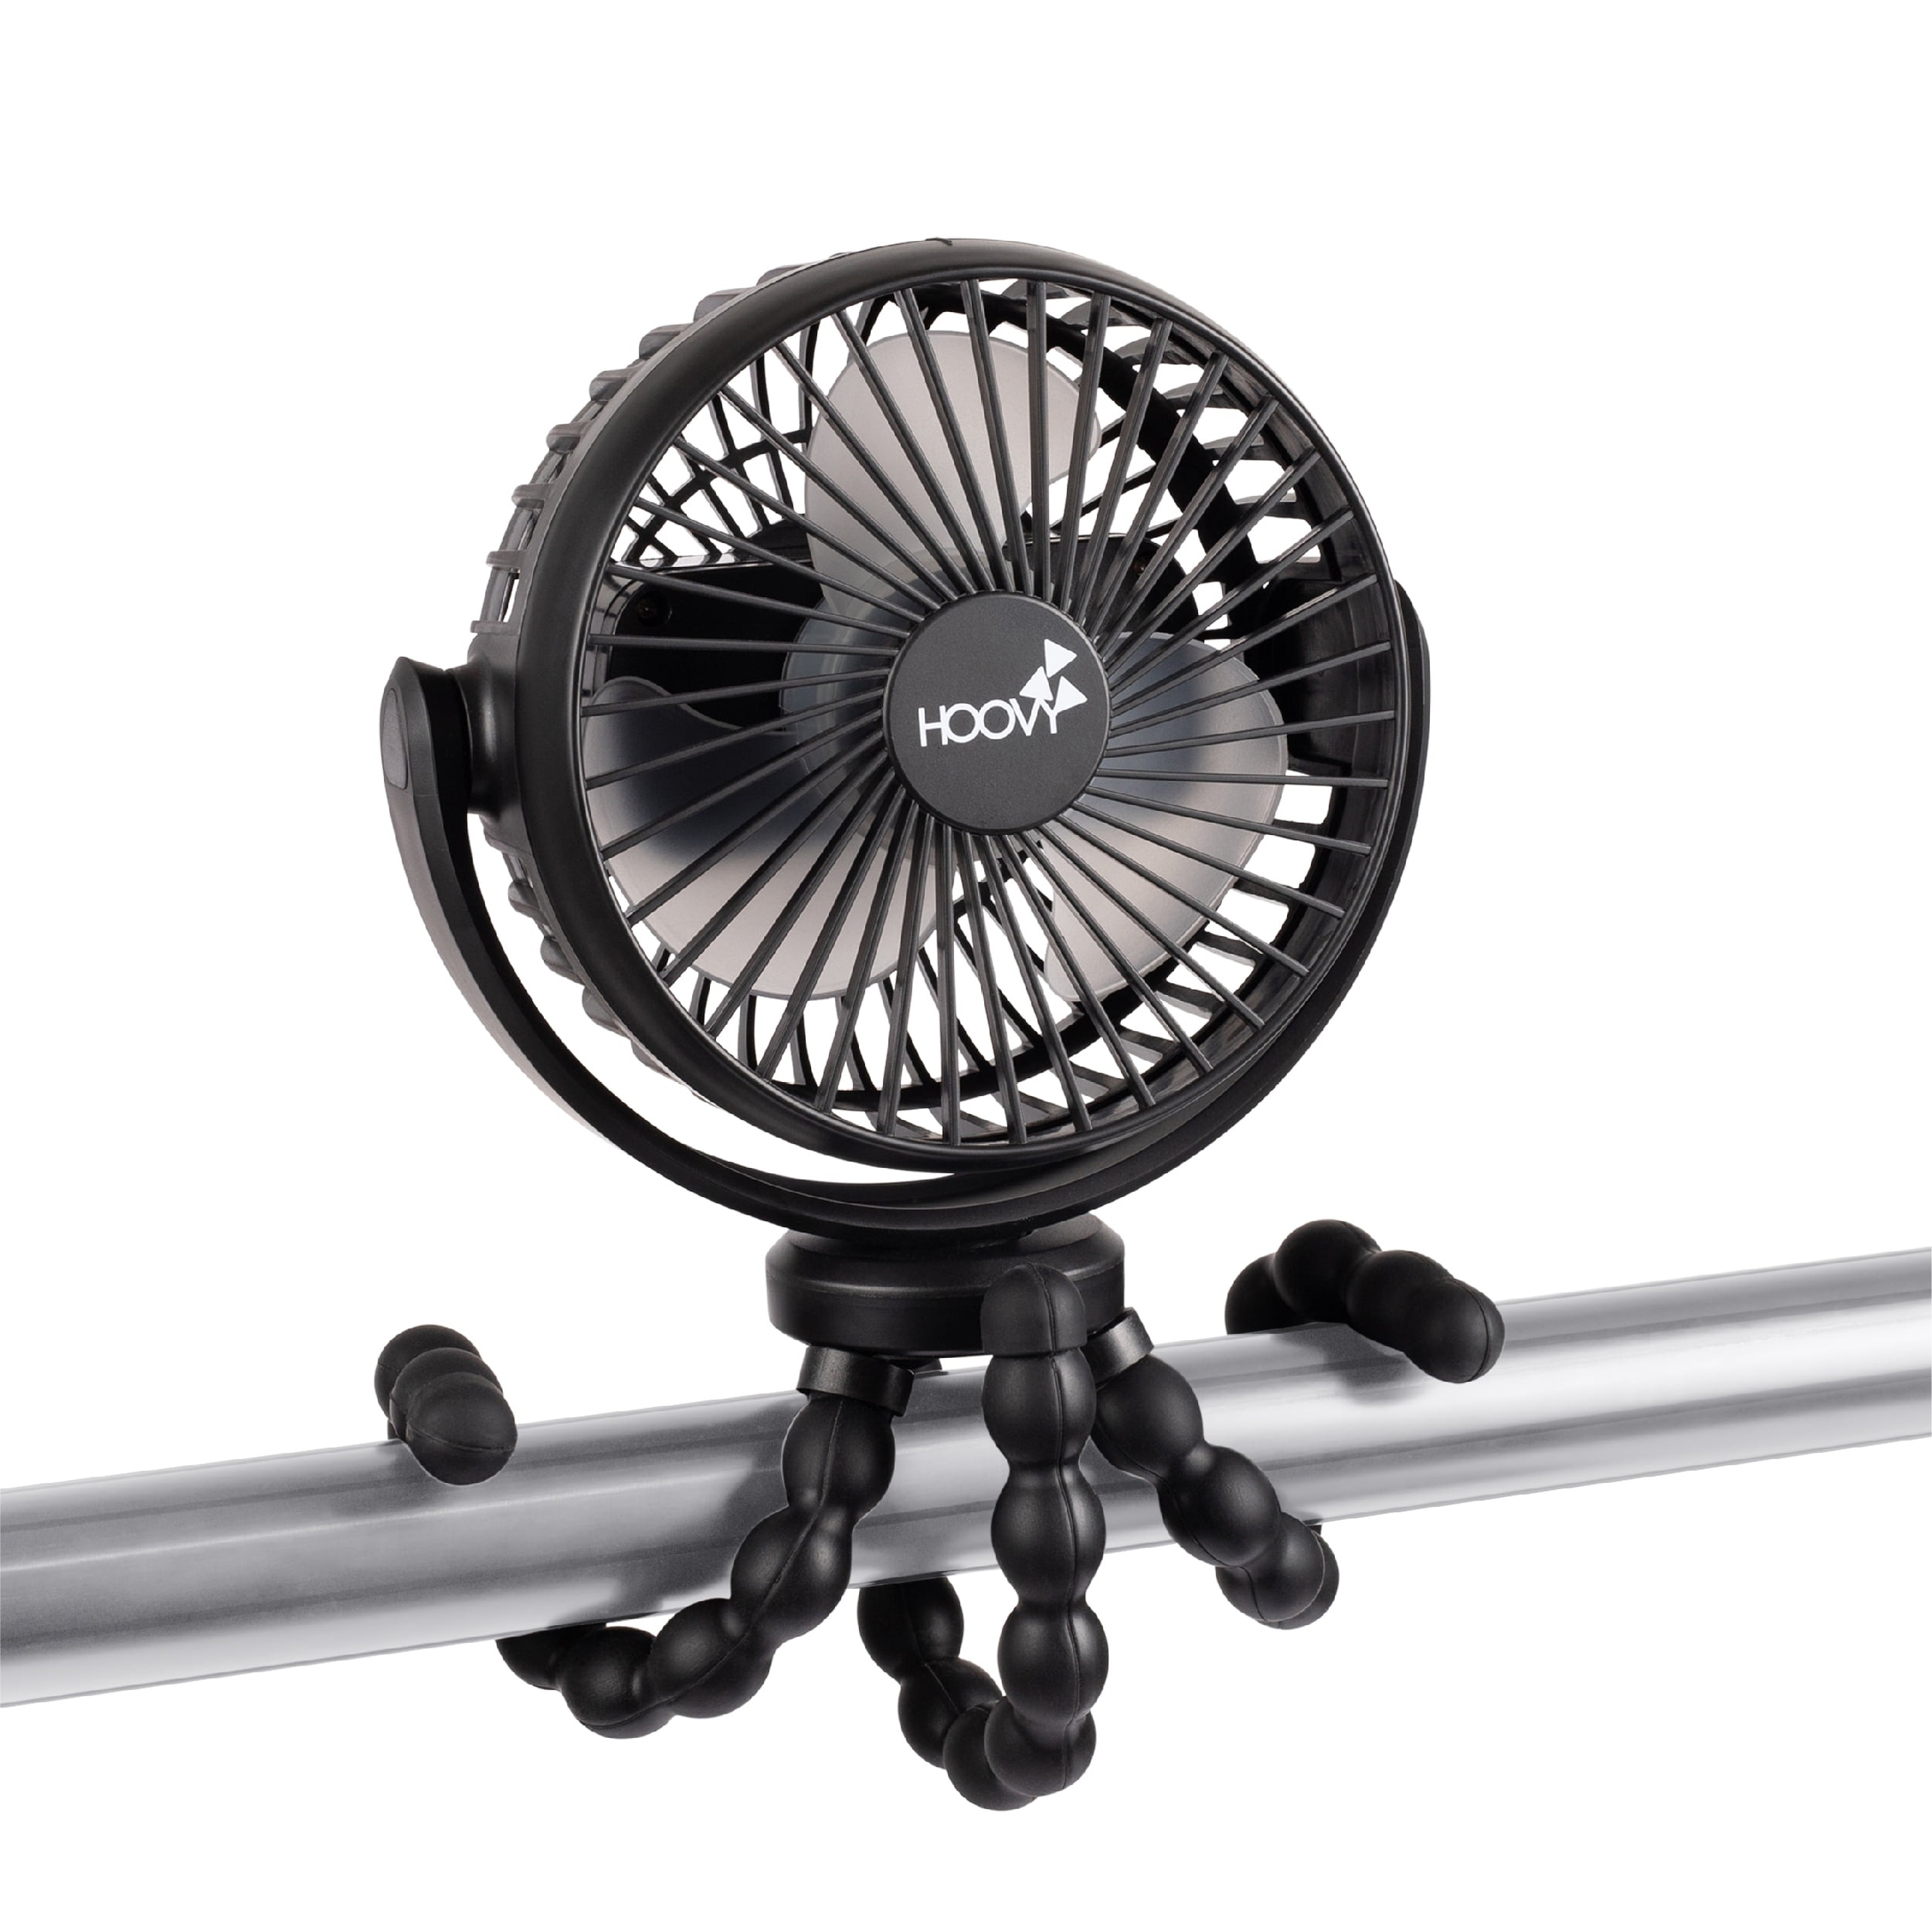 the fan attached to a pole with its moldable legs